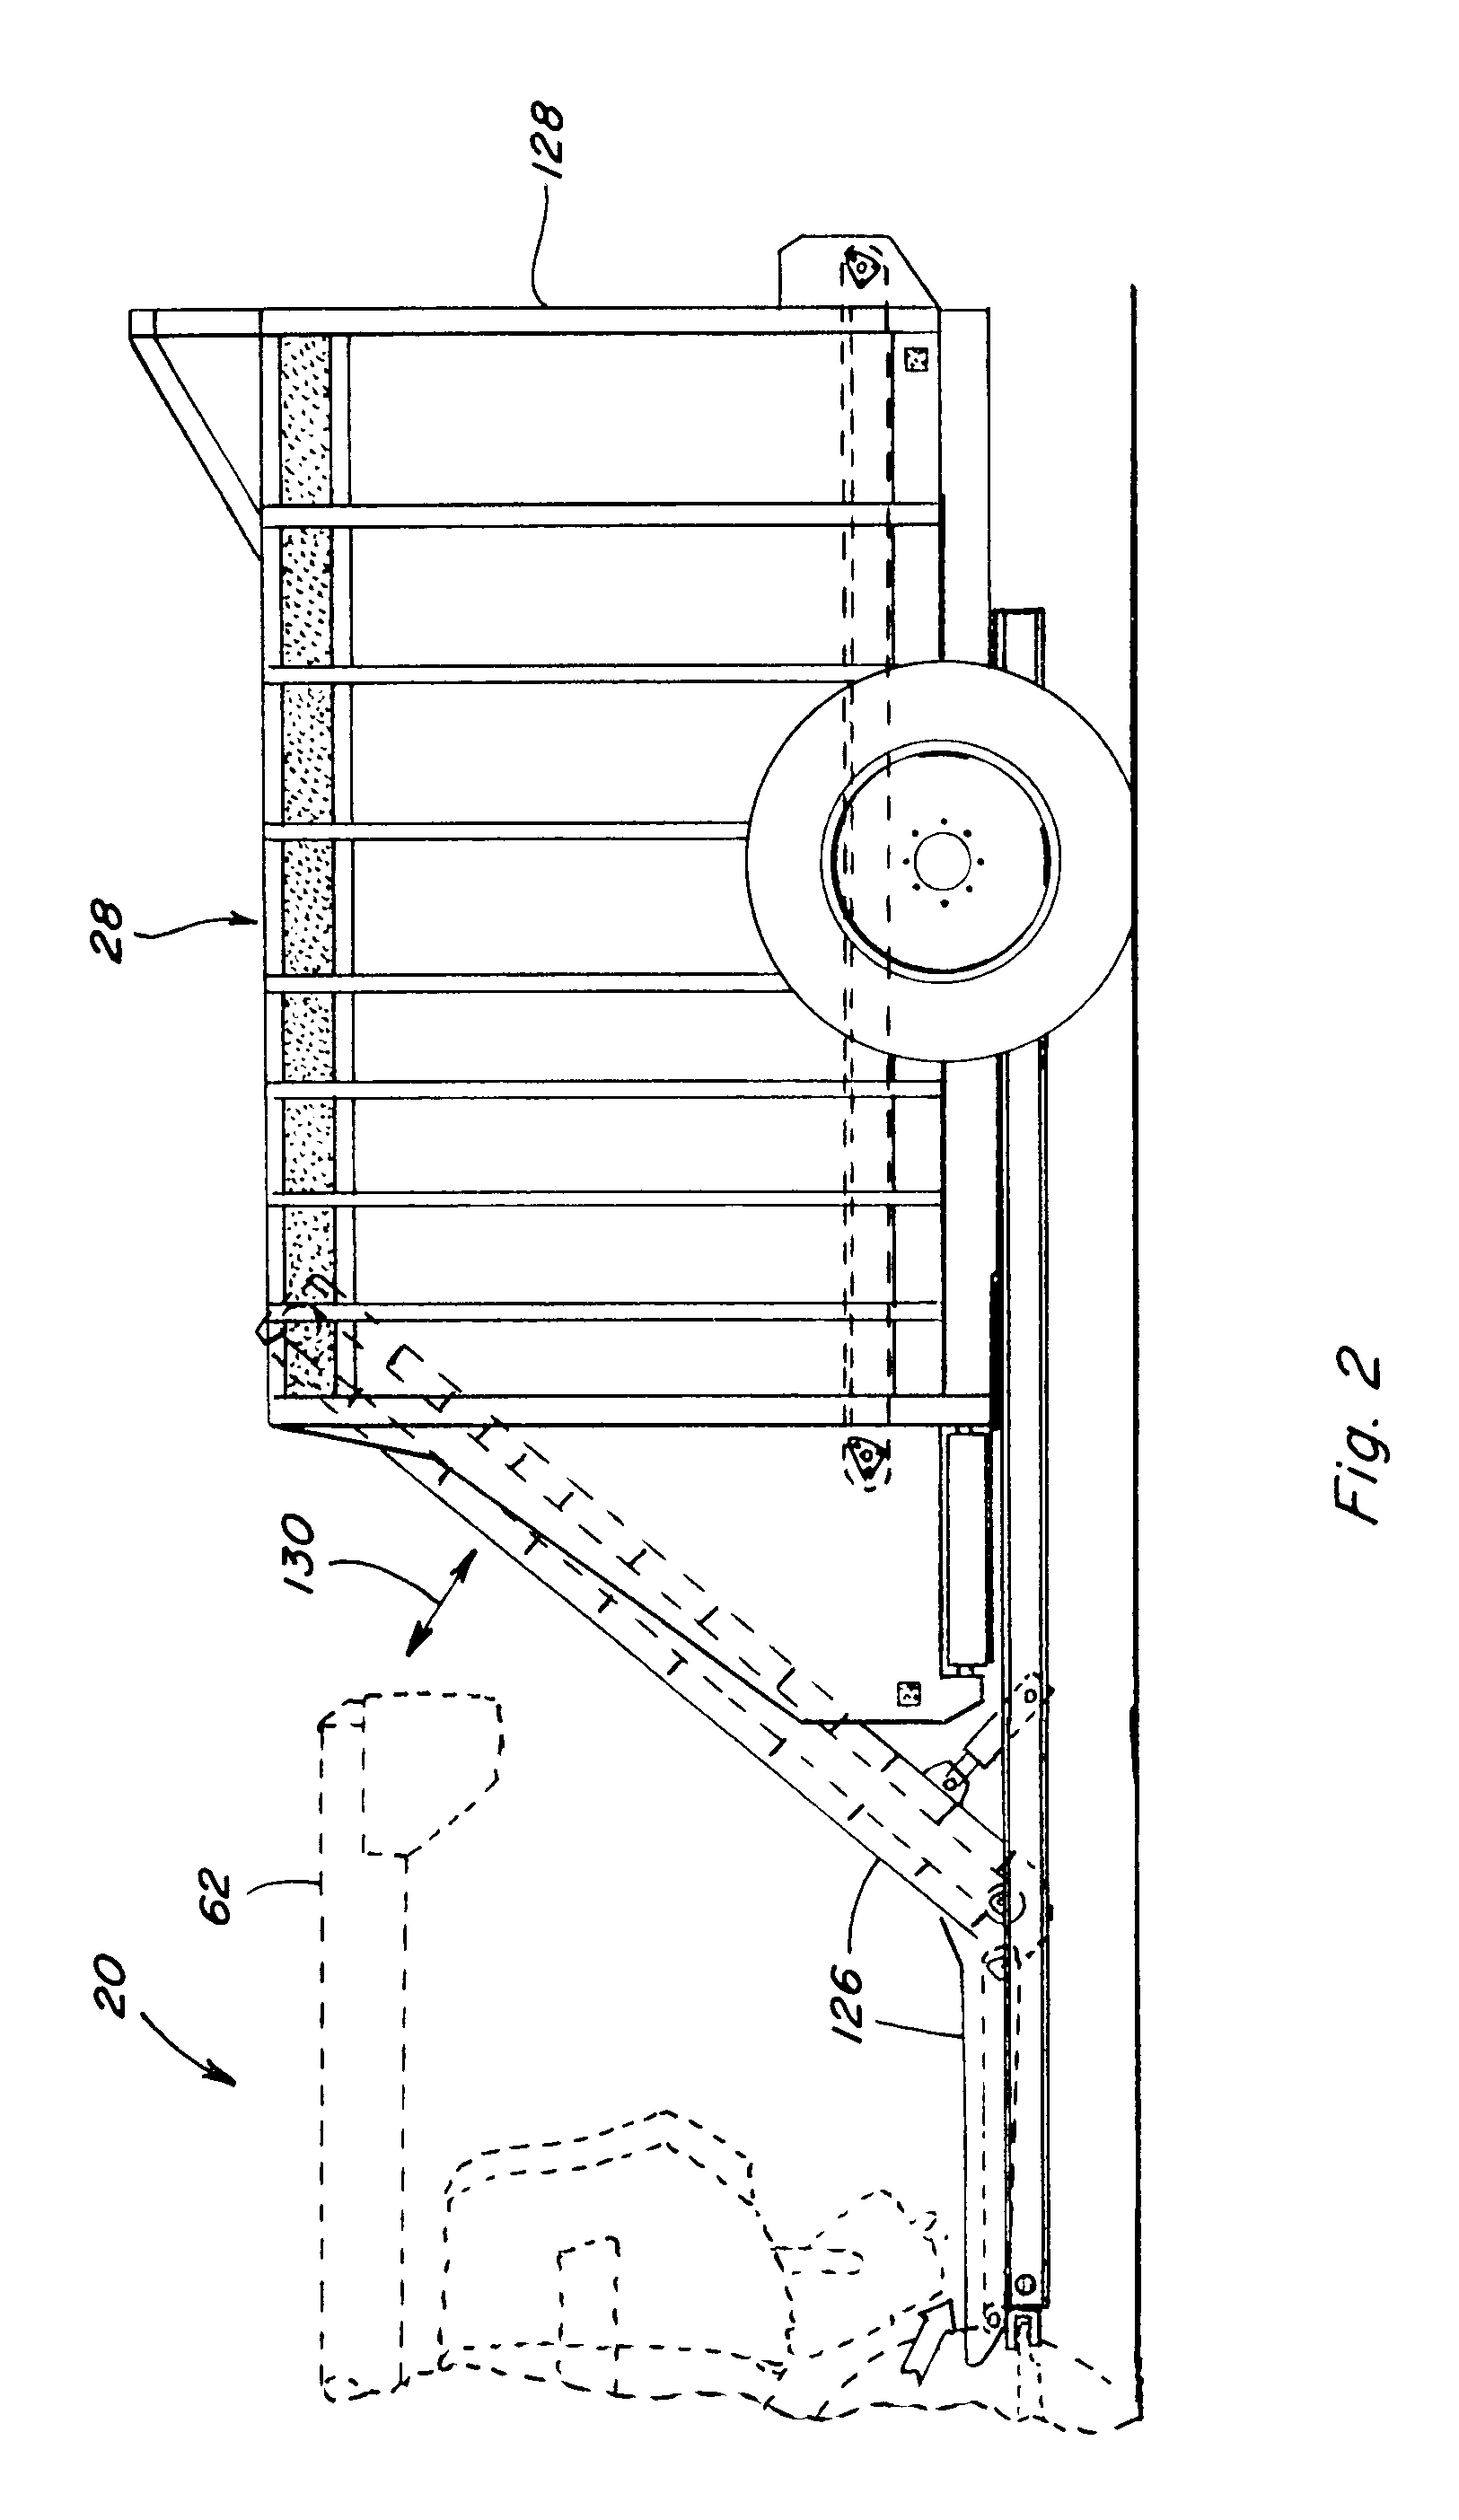 Agricultural combine with internal cob de-husking apparatus and system